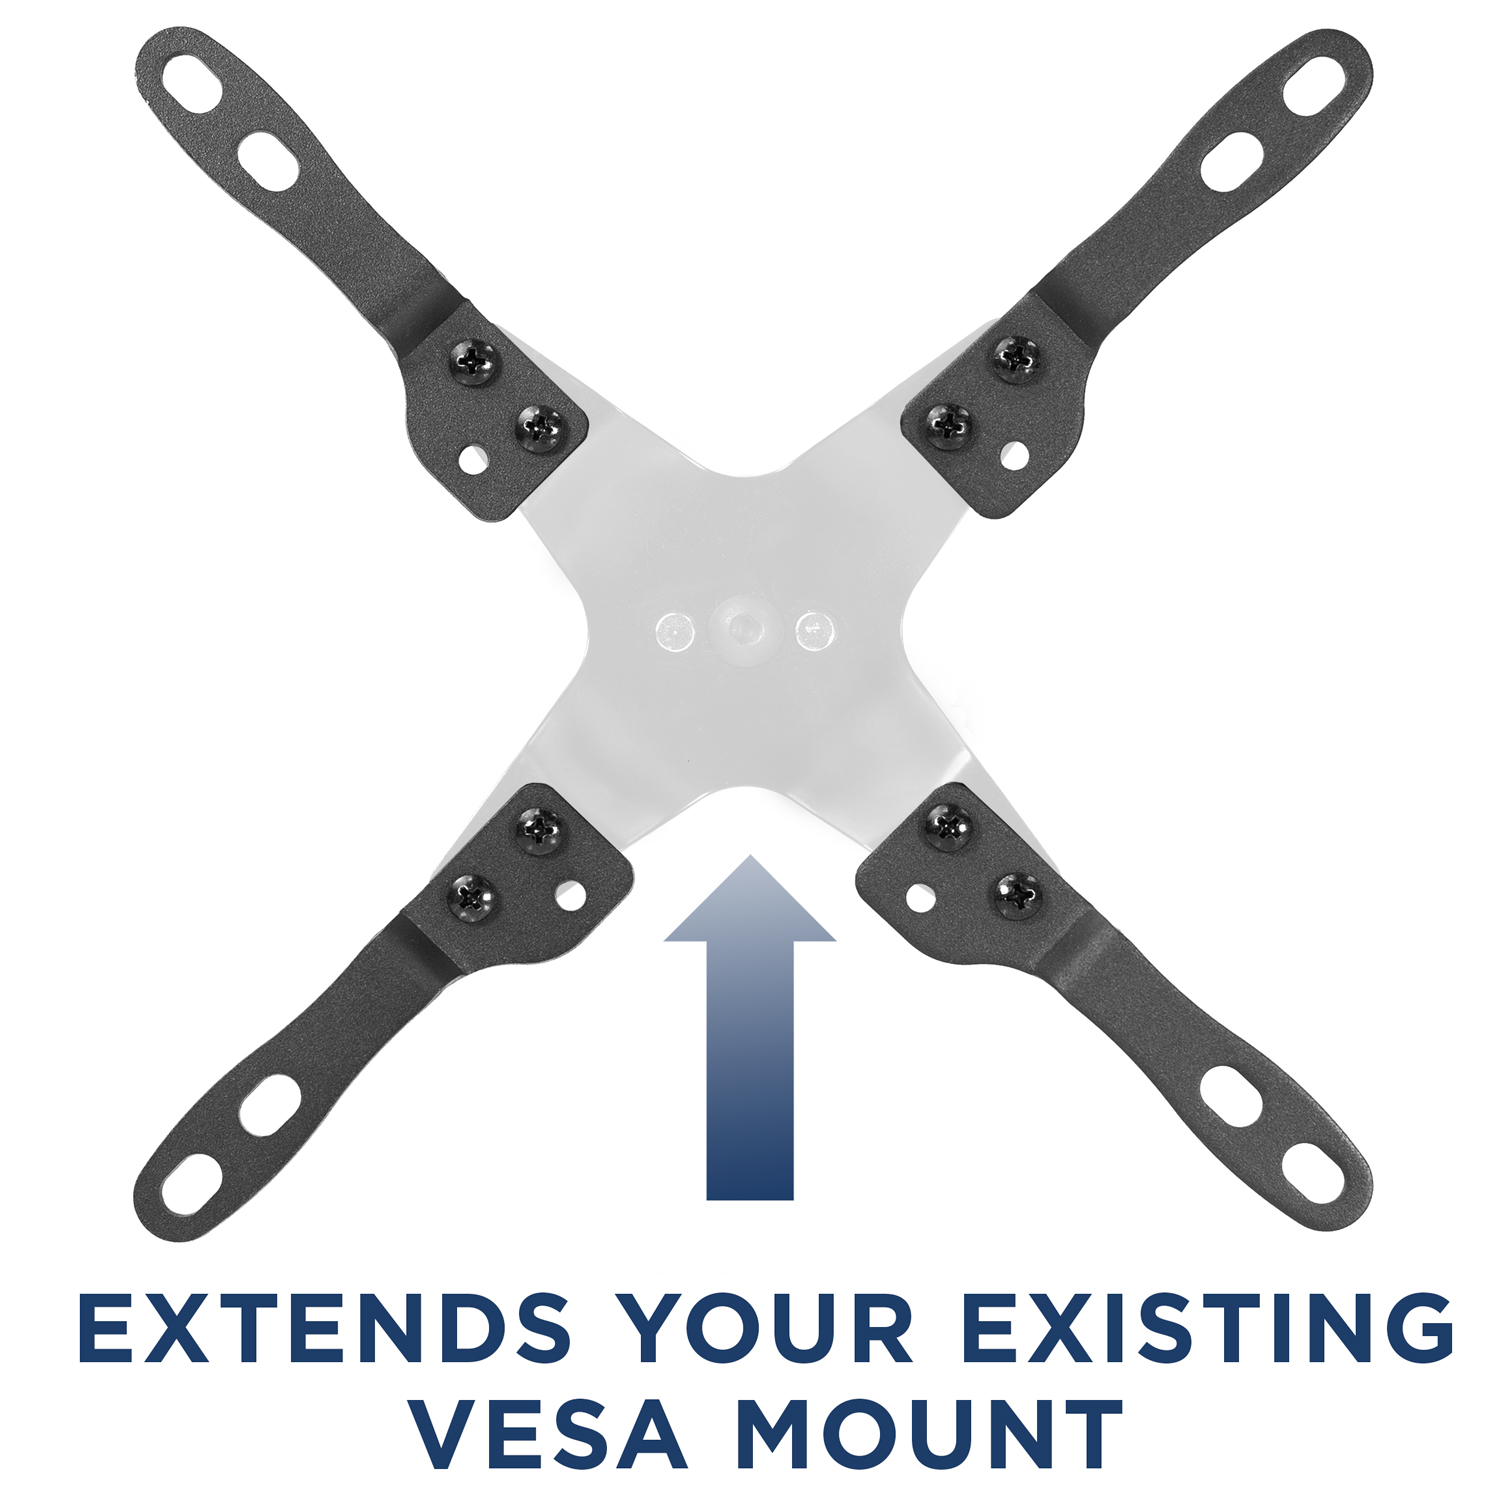 Mount-It! VESA Mount Adapter Kit, TV Wall Mount Bracket Adapter Converts 75x75 and 100x100 mm Patterns to 200x100 and 200x200 mm, Fits Most 23 inch to 42 inch TV's and Monitors, Hardware Included - image 5 of 8